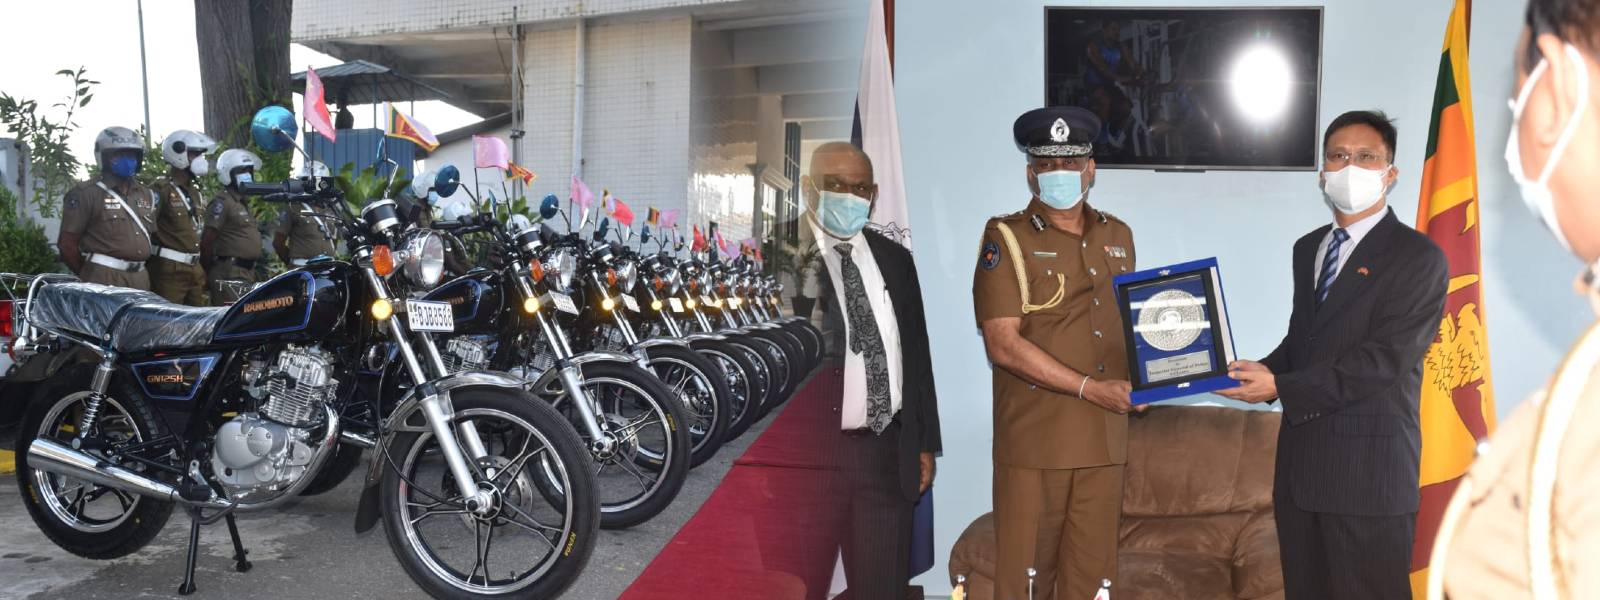 Chinese Ambassador gifts ten motorcycles to Police